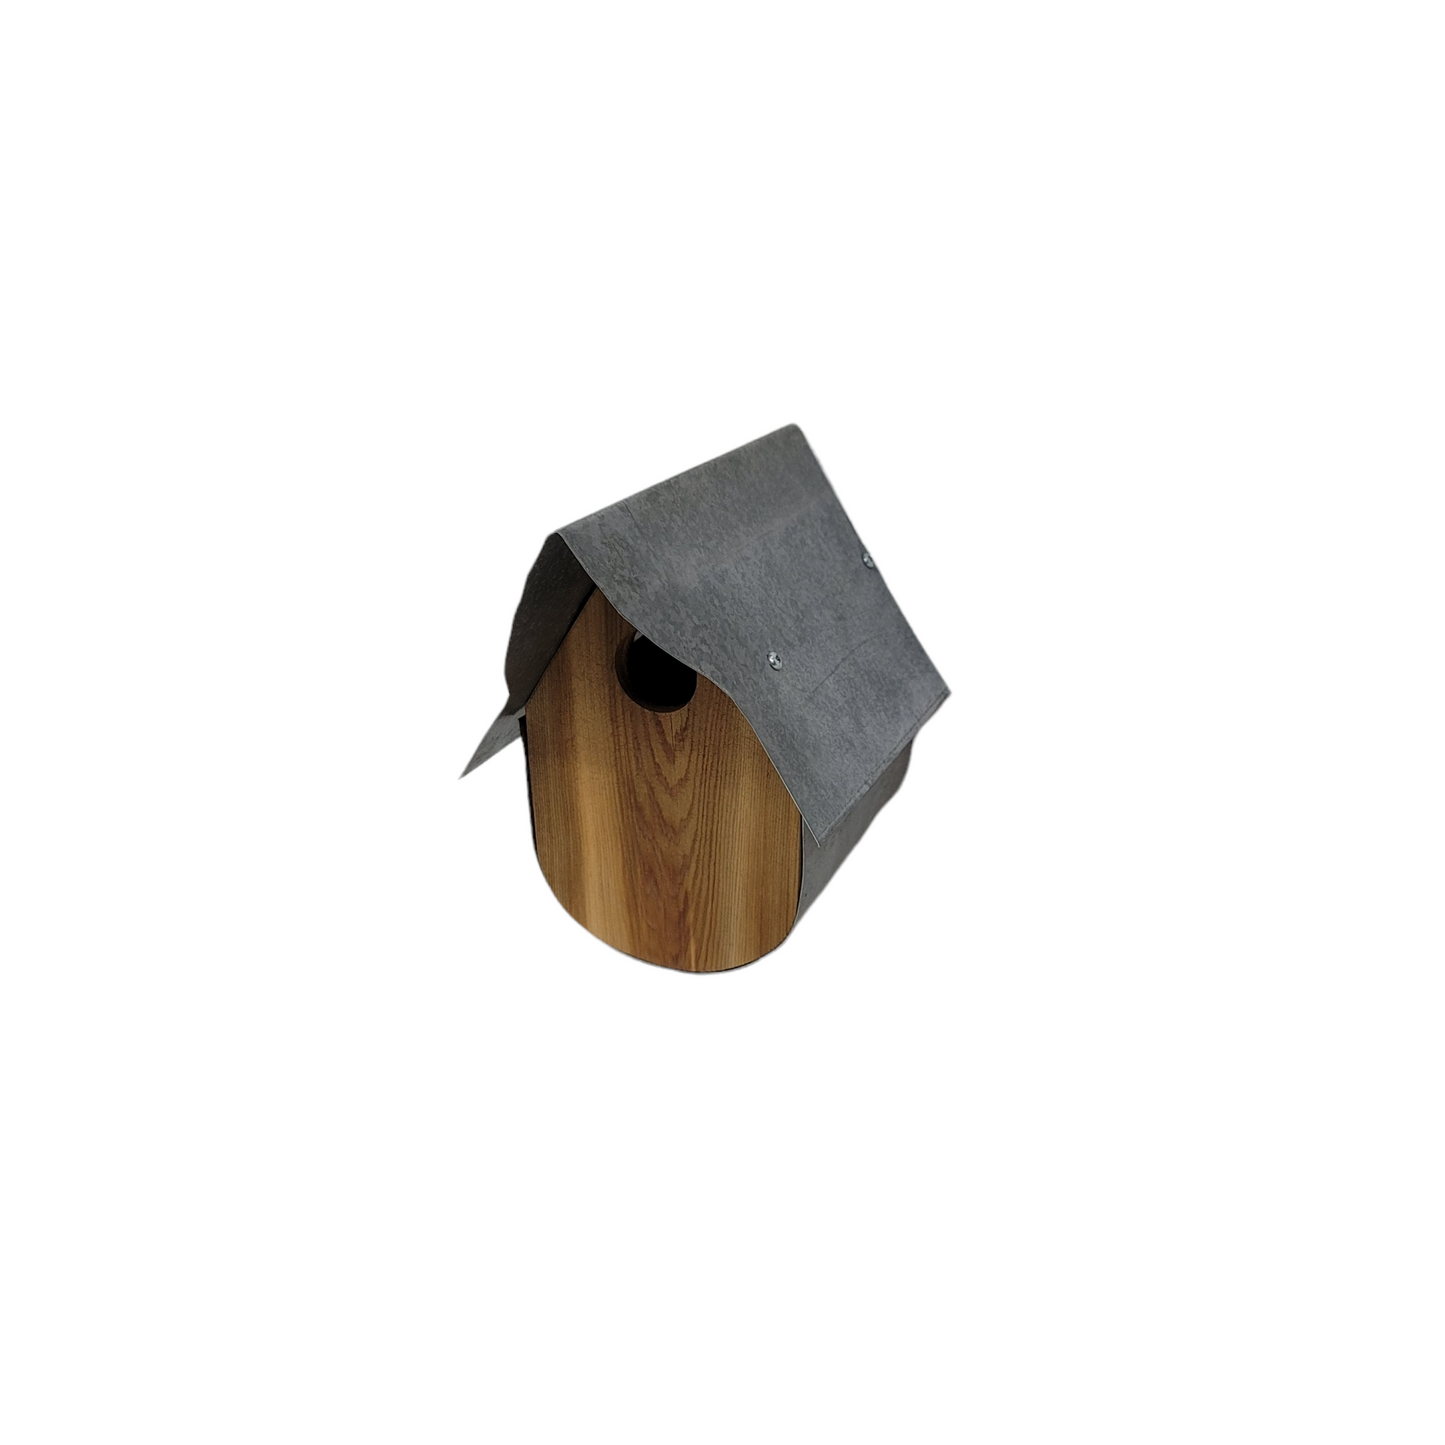 birdhouse 3 rustic styles to choose from dew drop